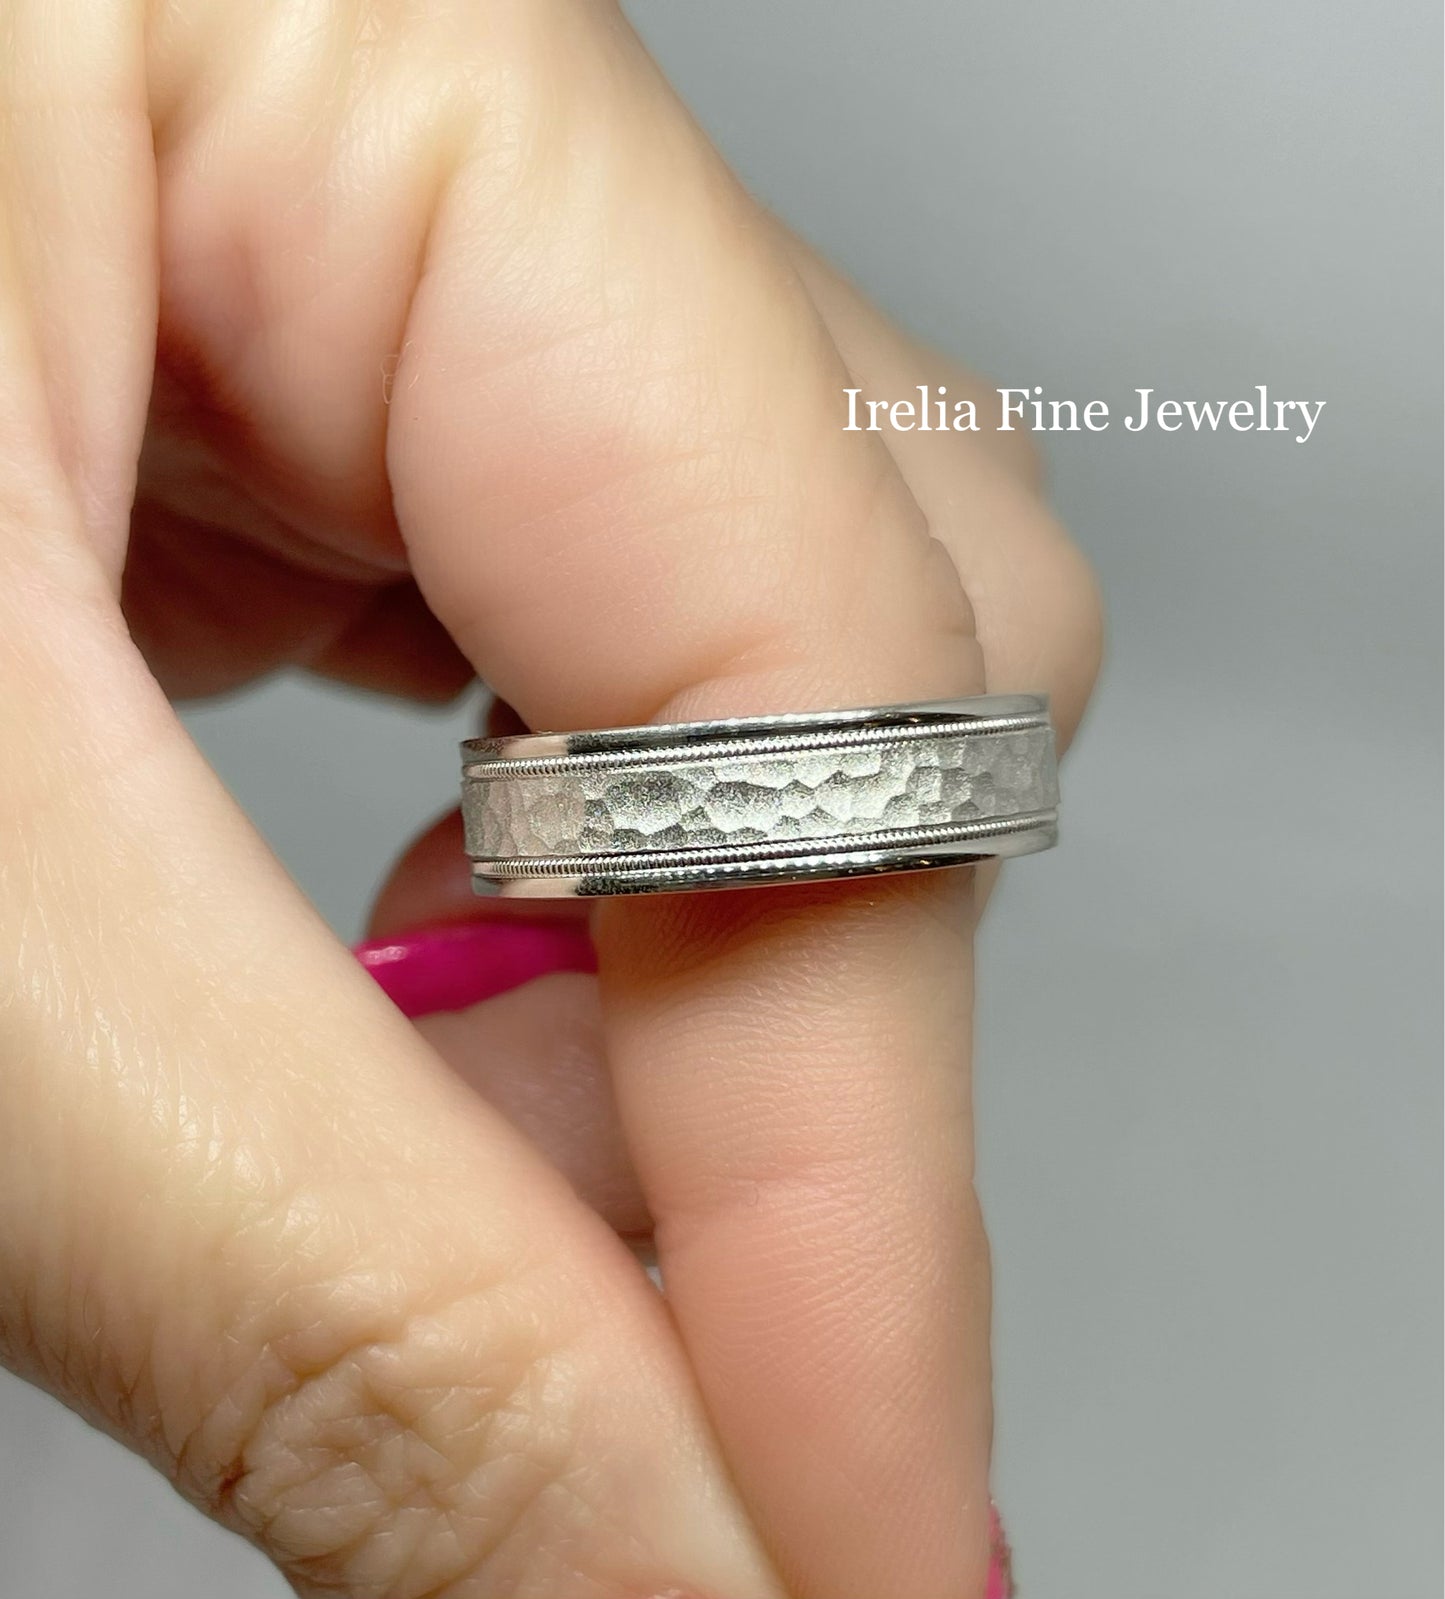 CrownRing Collection - 18k White Gold 6 Hammered Finish With Migraine Detailing